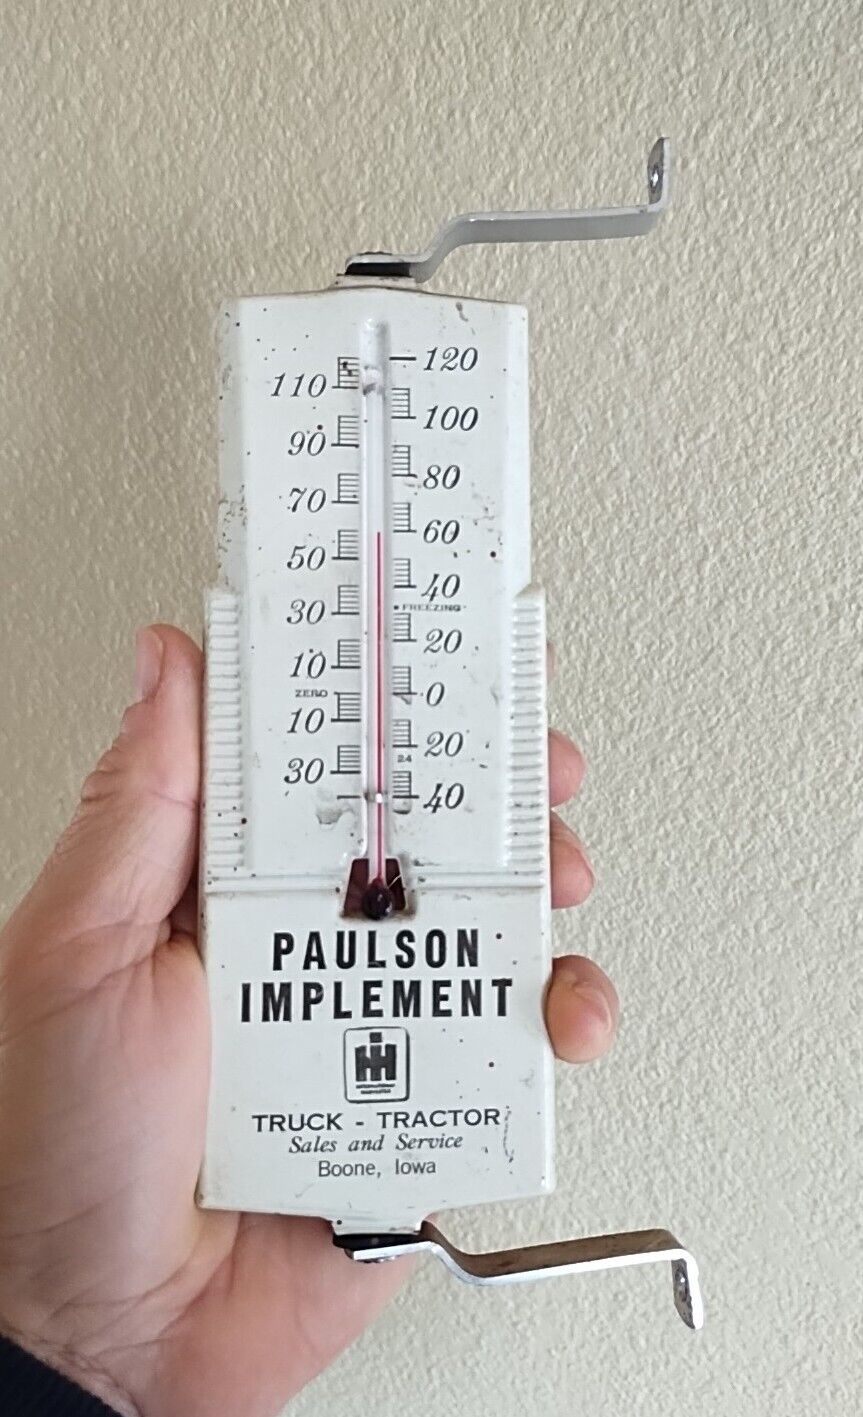 Vtg IH Metal THERMOMETER PAULSON IMPLEMENT TRUCK TRACTOR SALE SERVICE BOONE IOWA